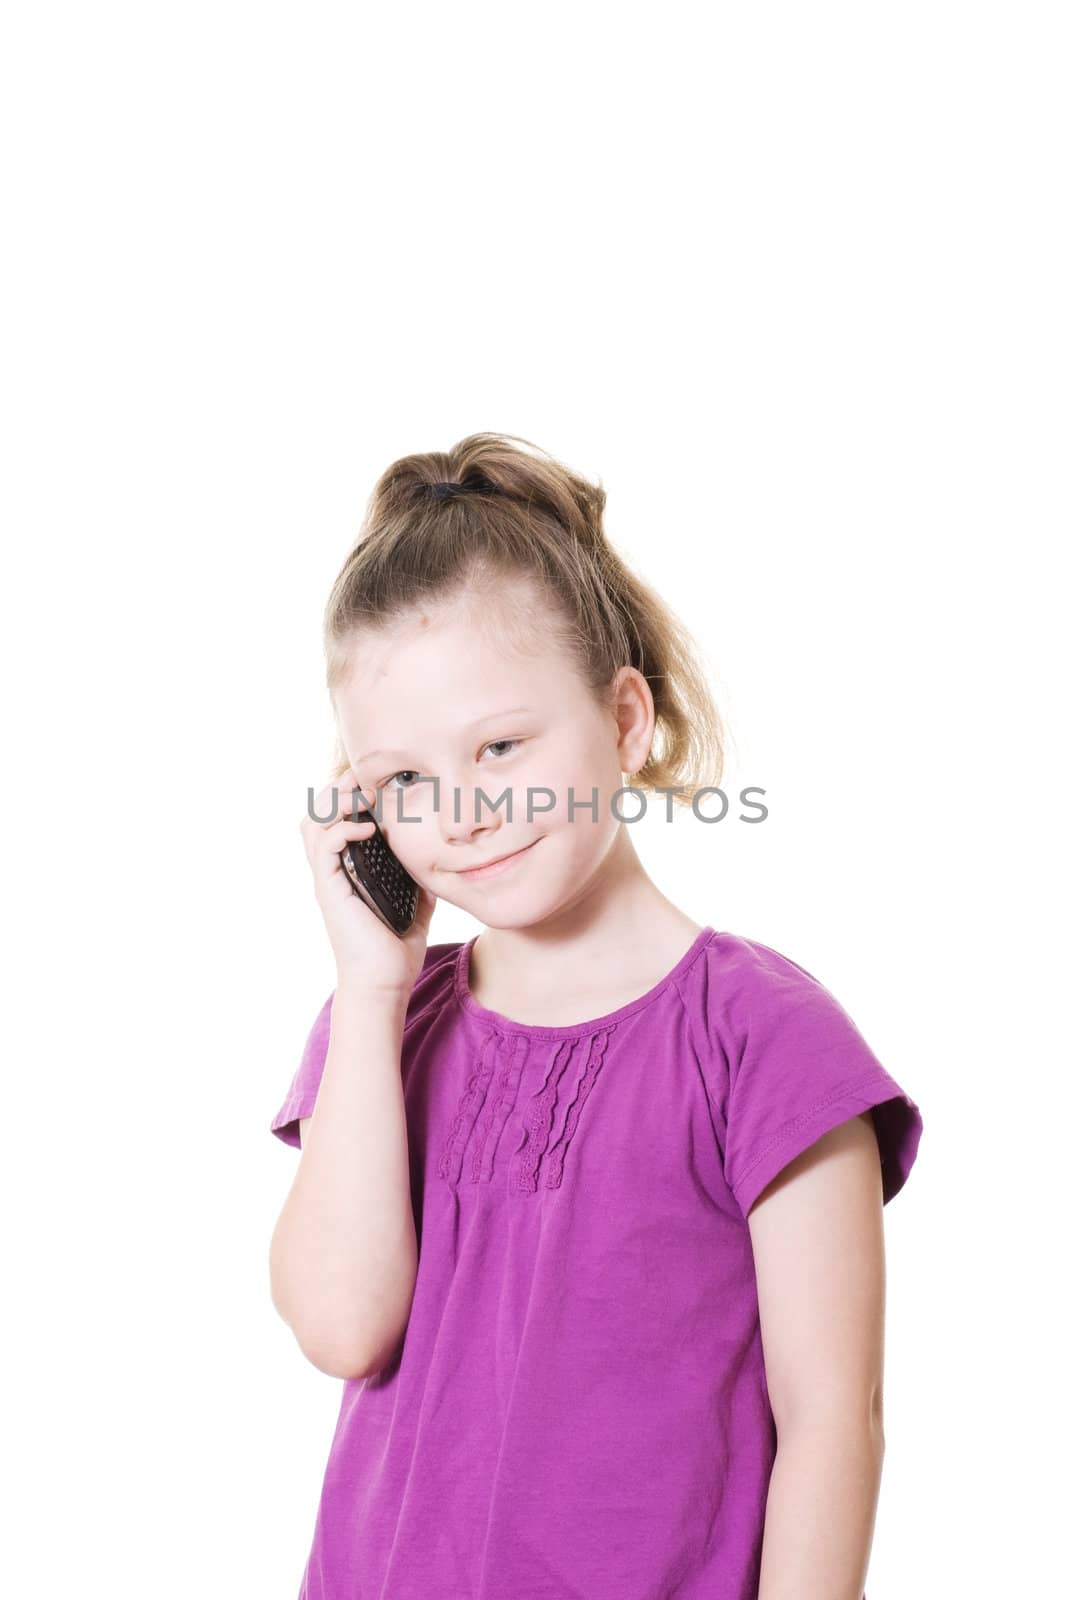 young girl using a mobile phone